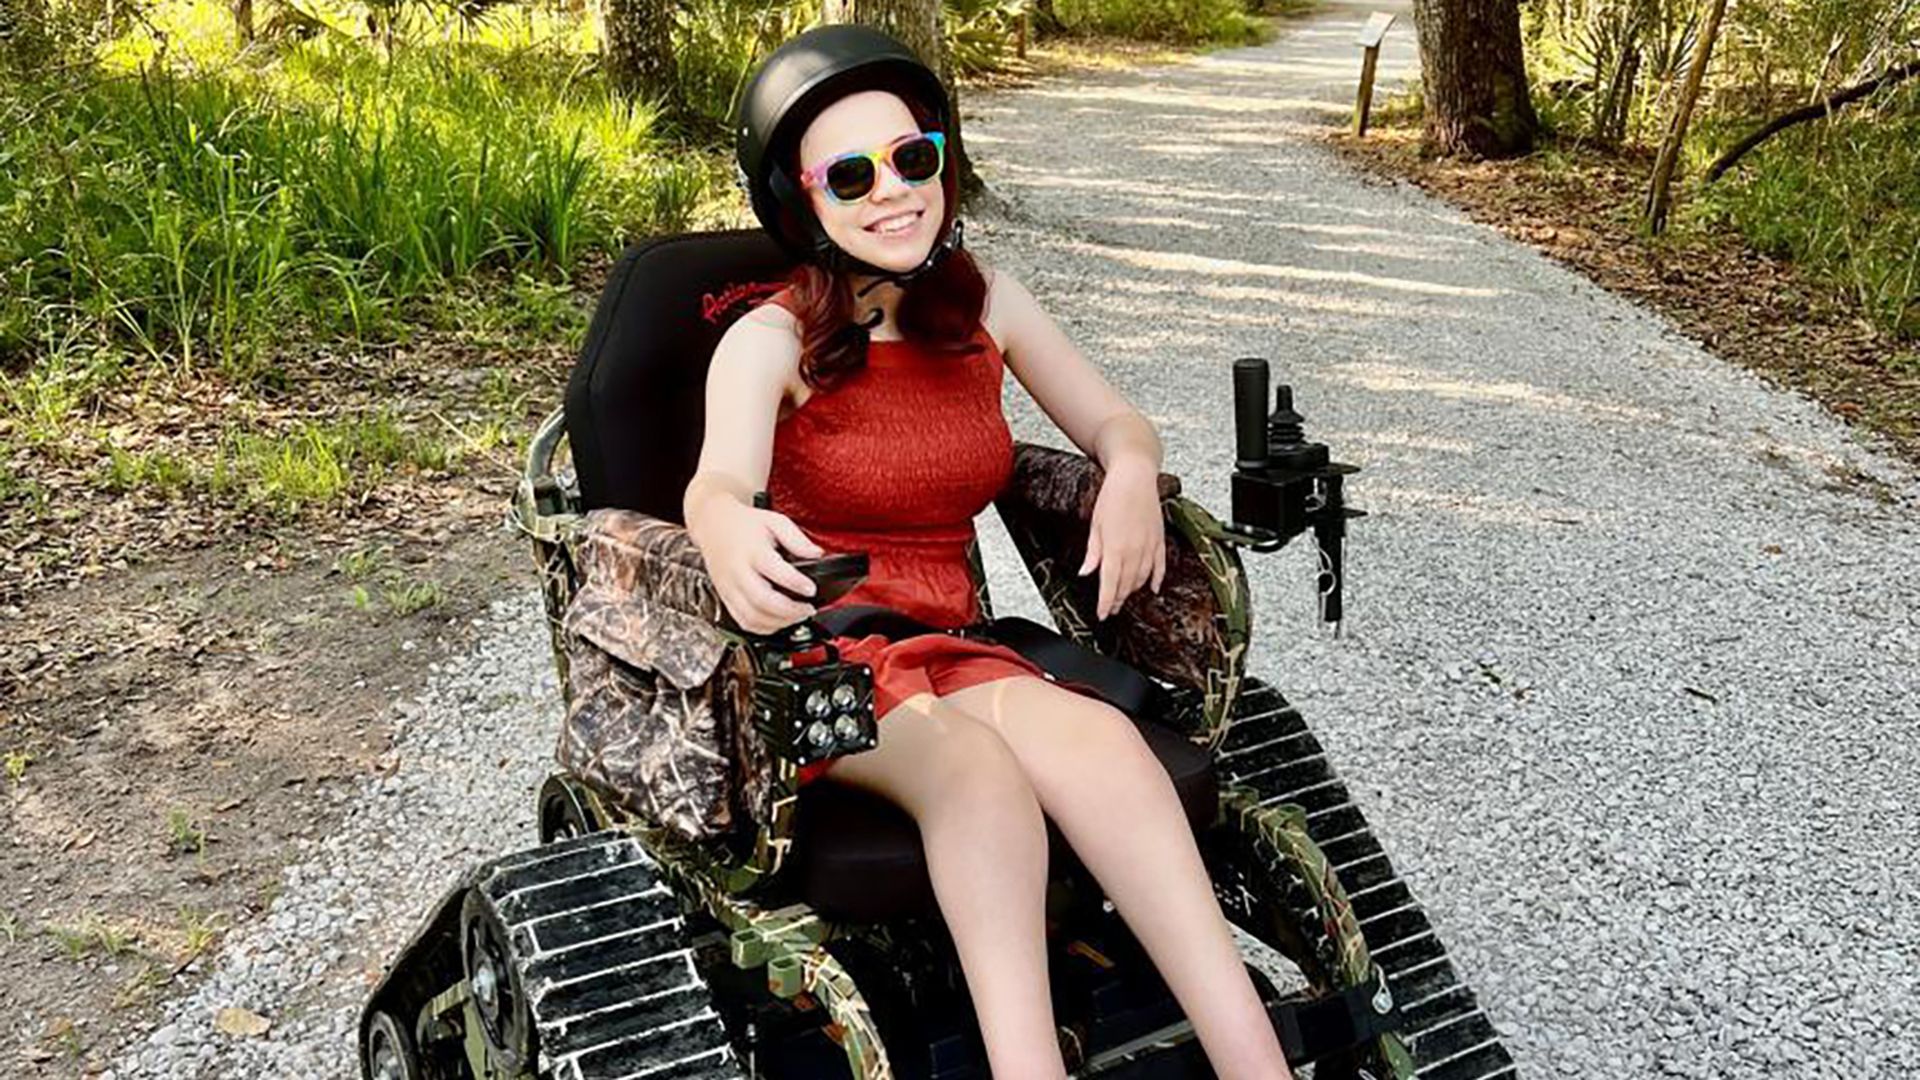 Photo shows a young woman in a track wheelchair on a gravel path. The chair is covered in a camo print and has a triangle-shaped track instead of wheels. She is wearing a helmet and sunglasses and using hand controls to move the chair.